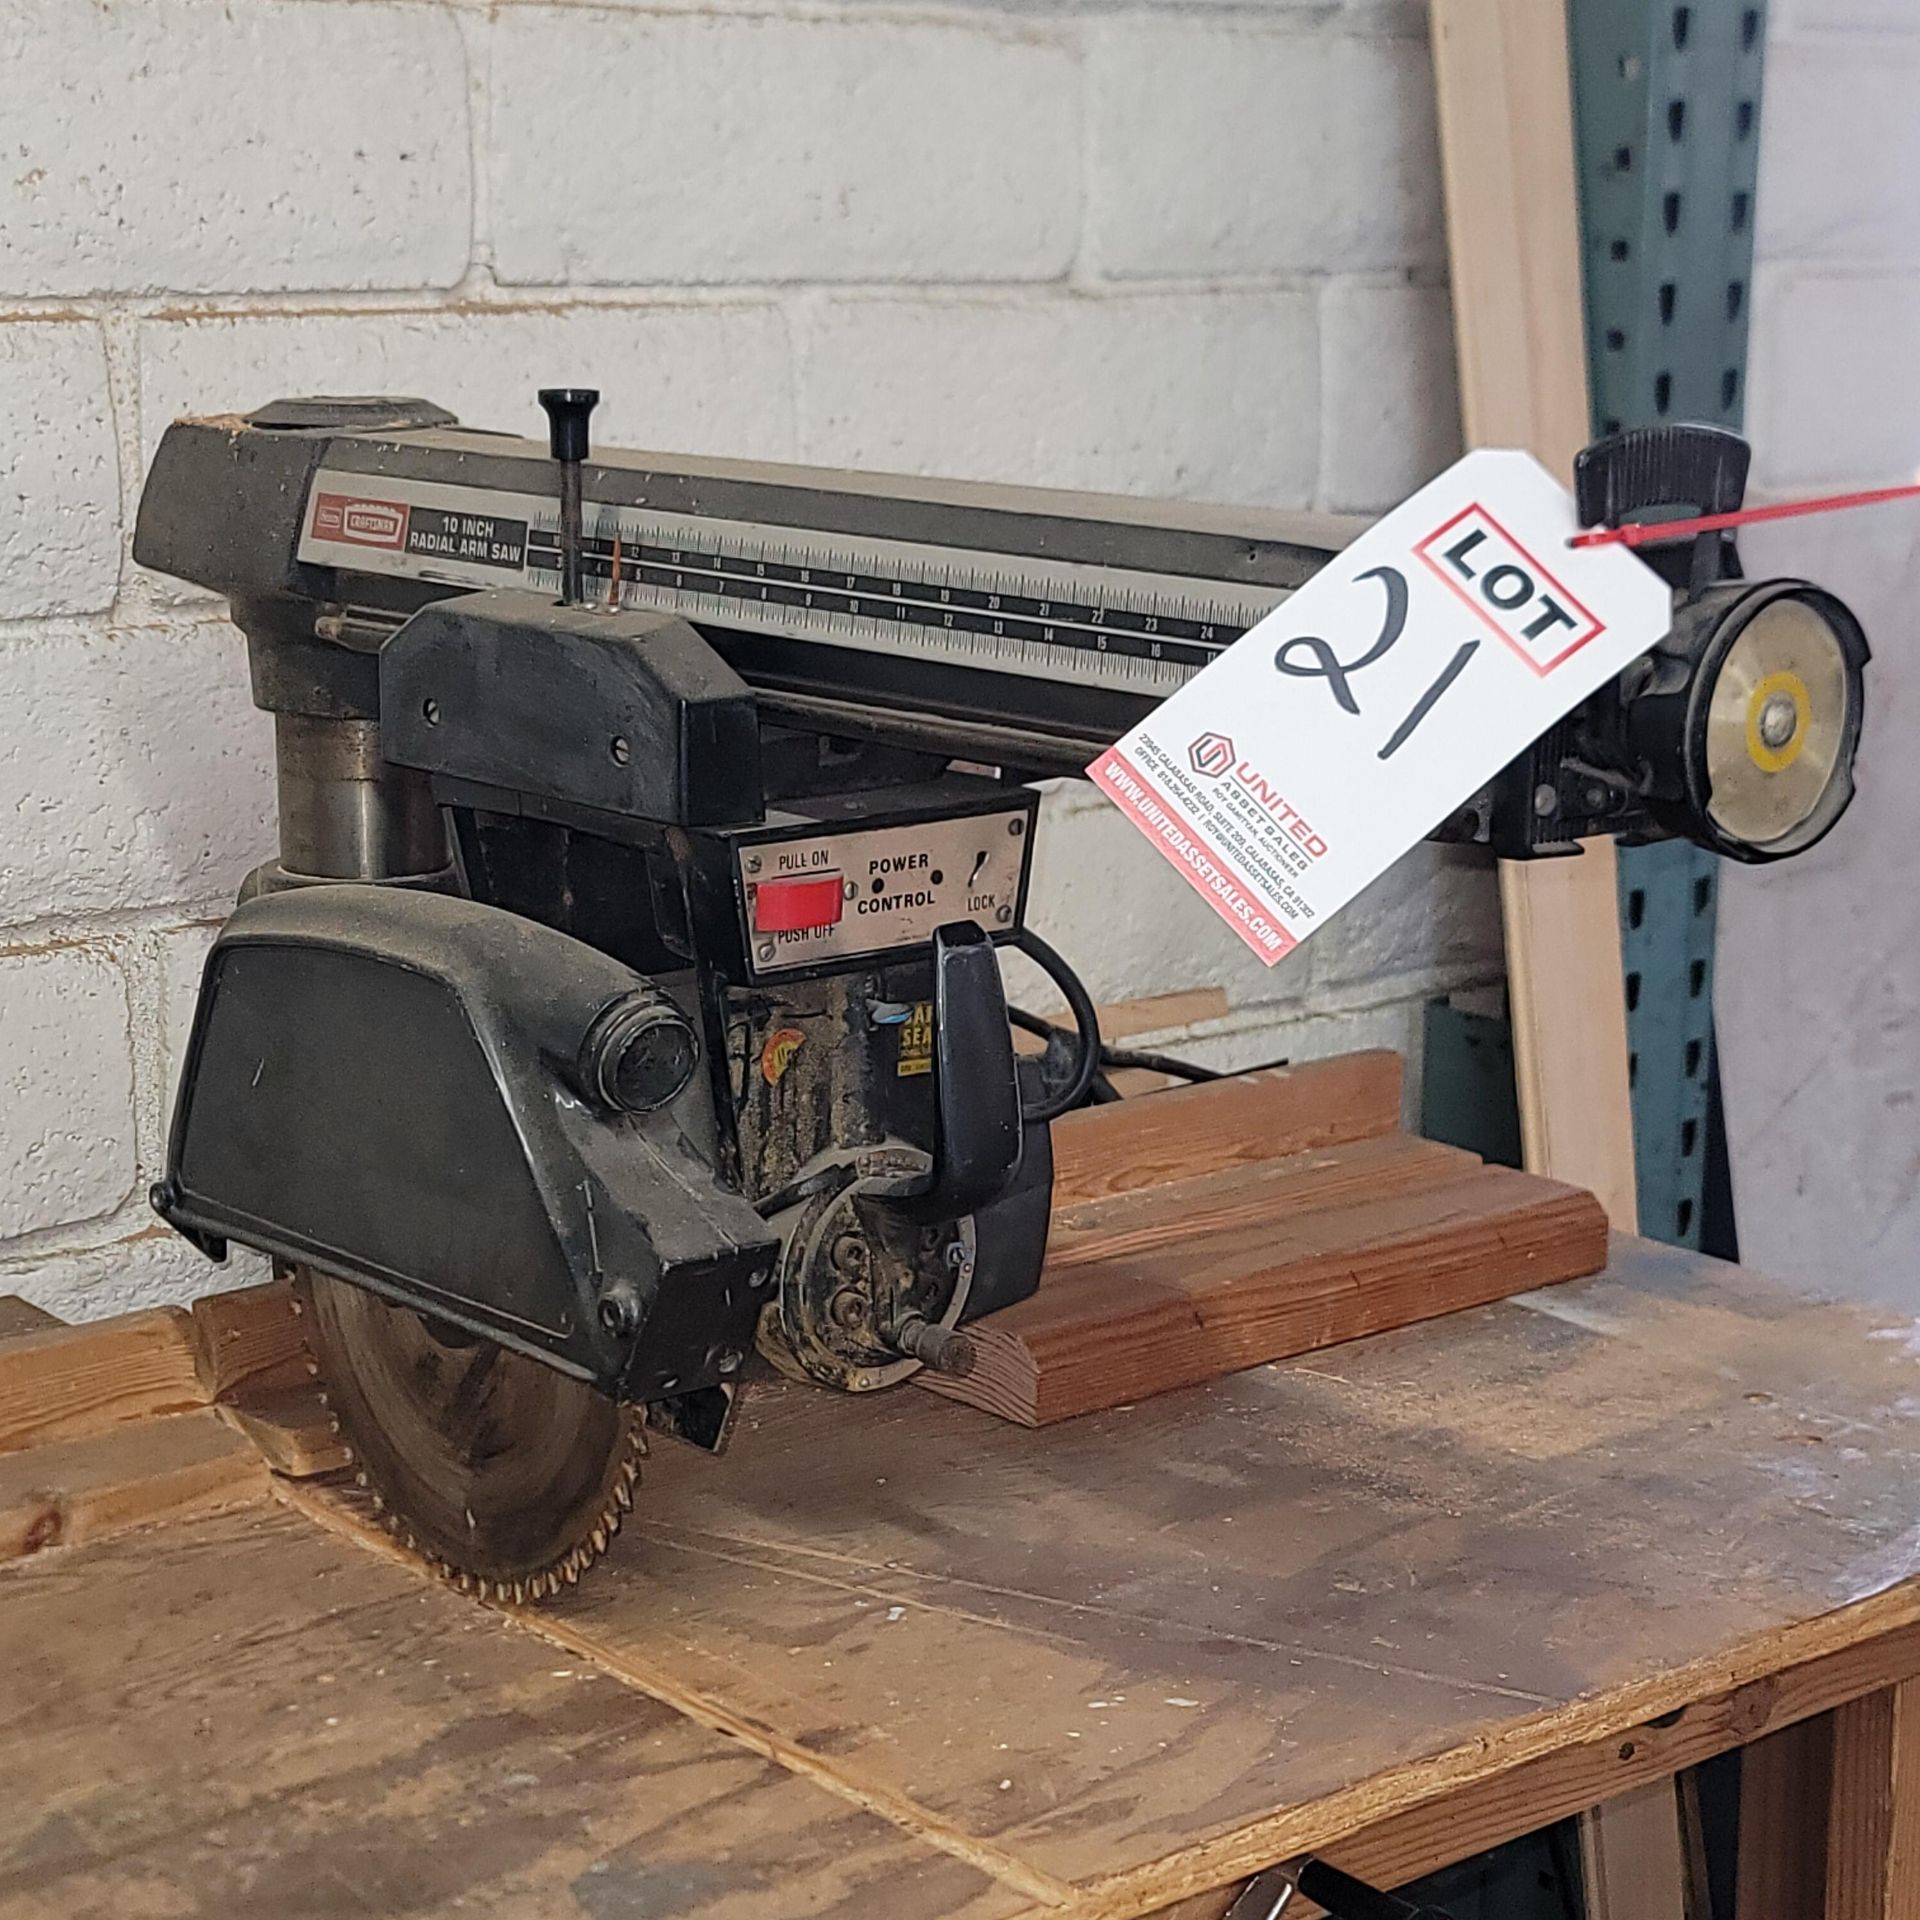 SEARS CRAFTSMAN 10" RADIAL ARM SAW, W/ BENCH AND MULTIPLE BLADES - Image 2 of 4